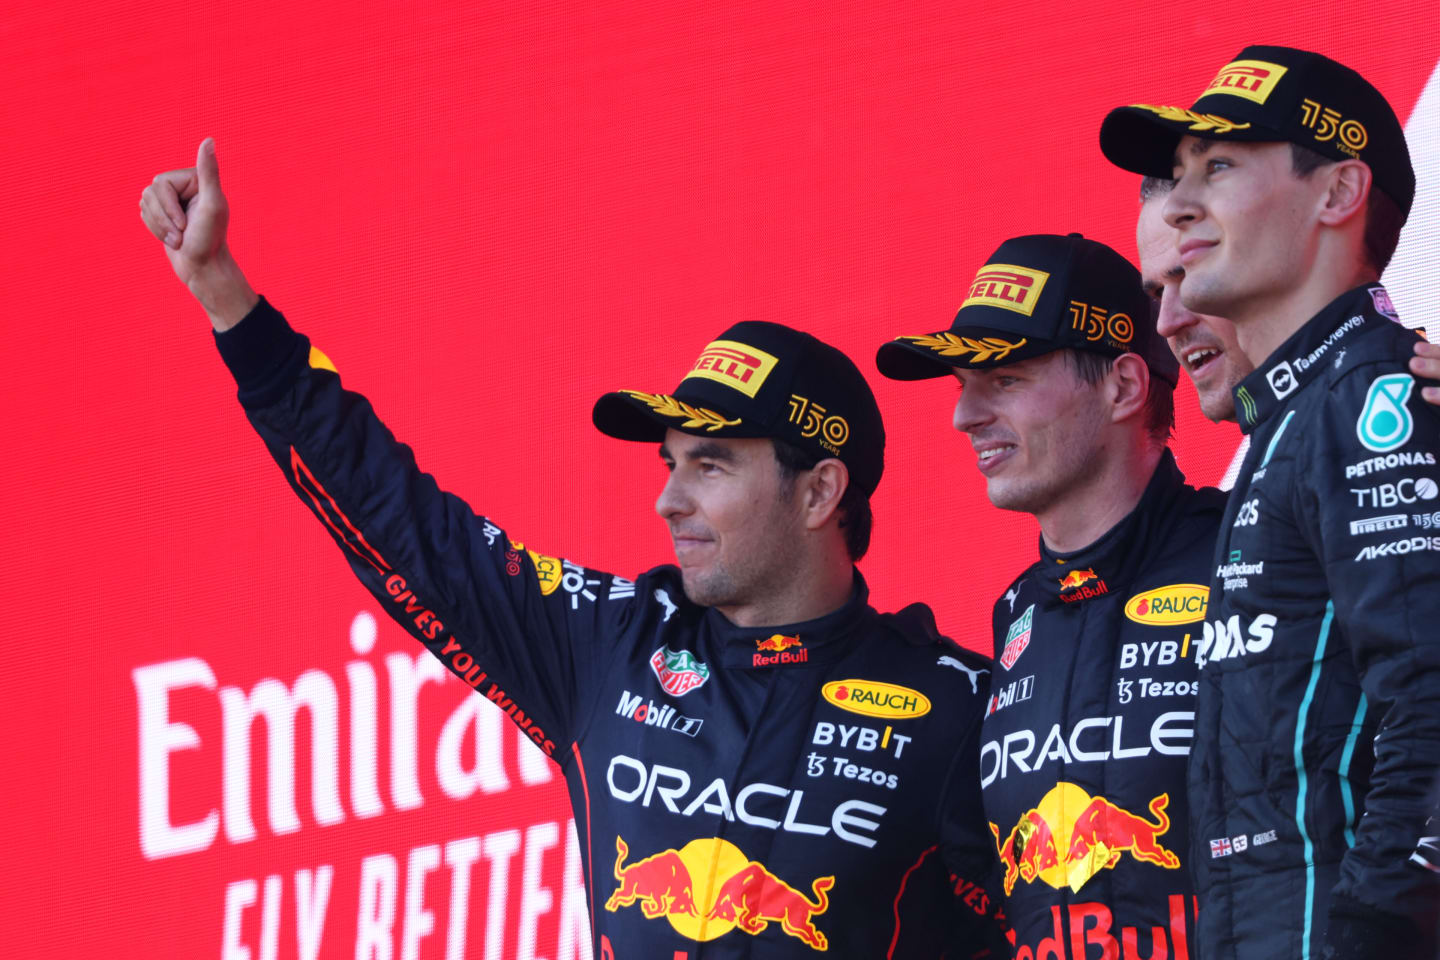 BAKU, AZERBAIJAN - JUNE 12: Race winner Max Verstappen of the Netherlands and Oracle Red Bull Racing (second from left), Second placed Sergio Perez of Mexico and Oracle Red Bull Racing (L), Third placed George Russell of Great Britain and Mercedes (R) and Tom Hart Performance Engineer at Red Bull Racing (second from right) celebrate on the podium during the F1 Grand Prix of Azerbaijan at Baku City Circuit on June 12, 2022 in Baku, Azerbaijan. (Photo by Bryn Lennon - Formula 1/Formula 1 via Getty Images)